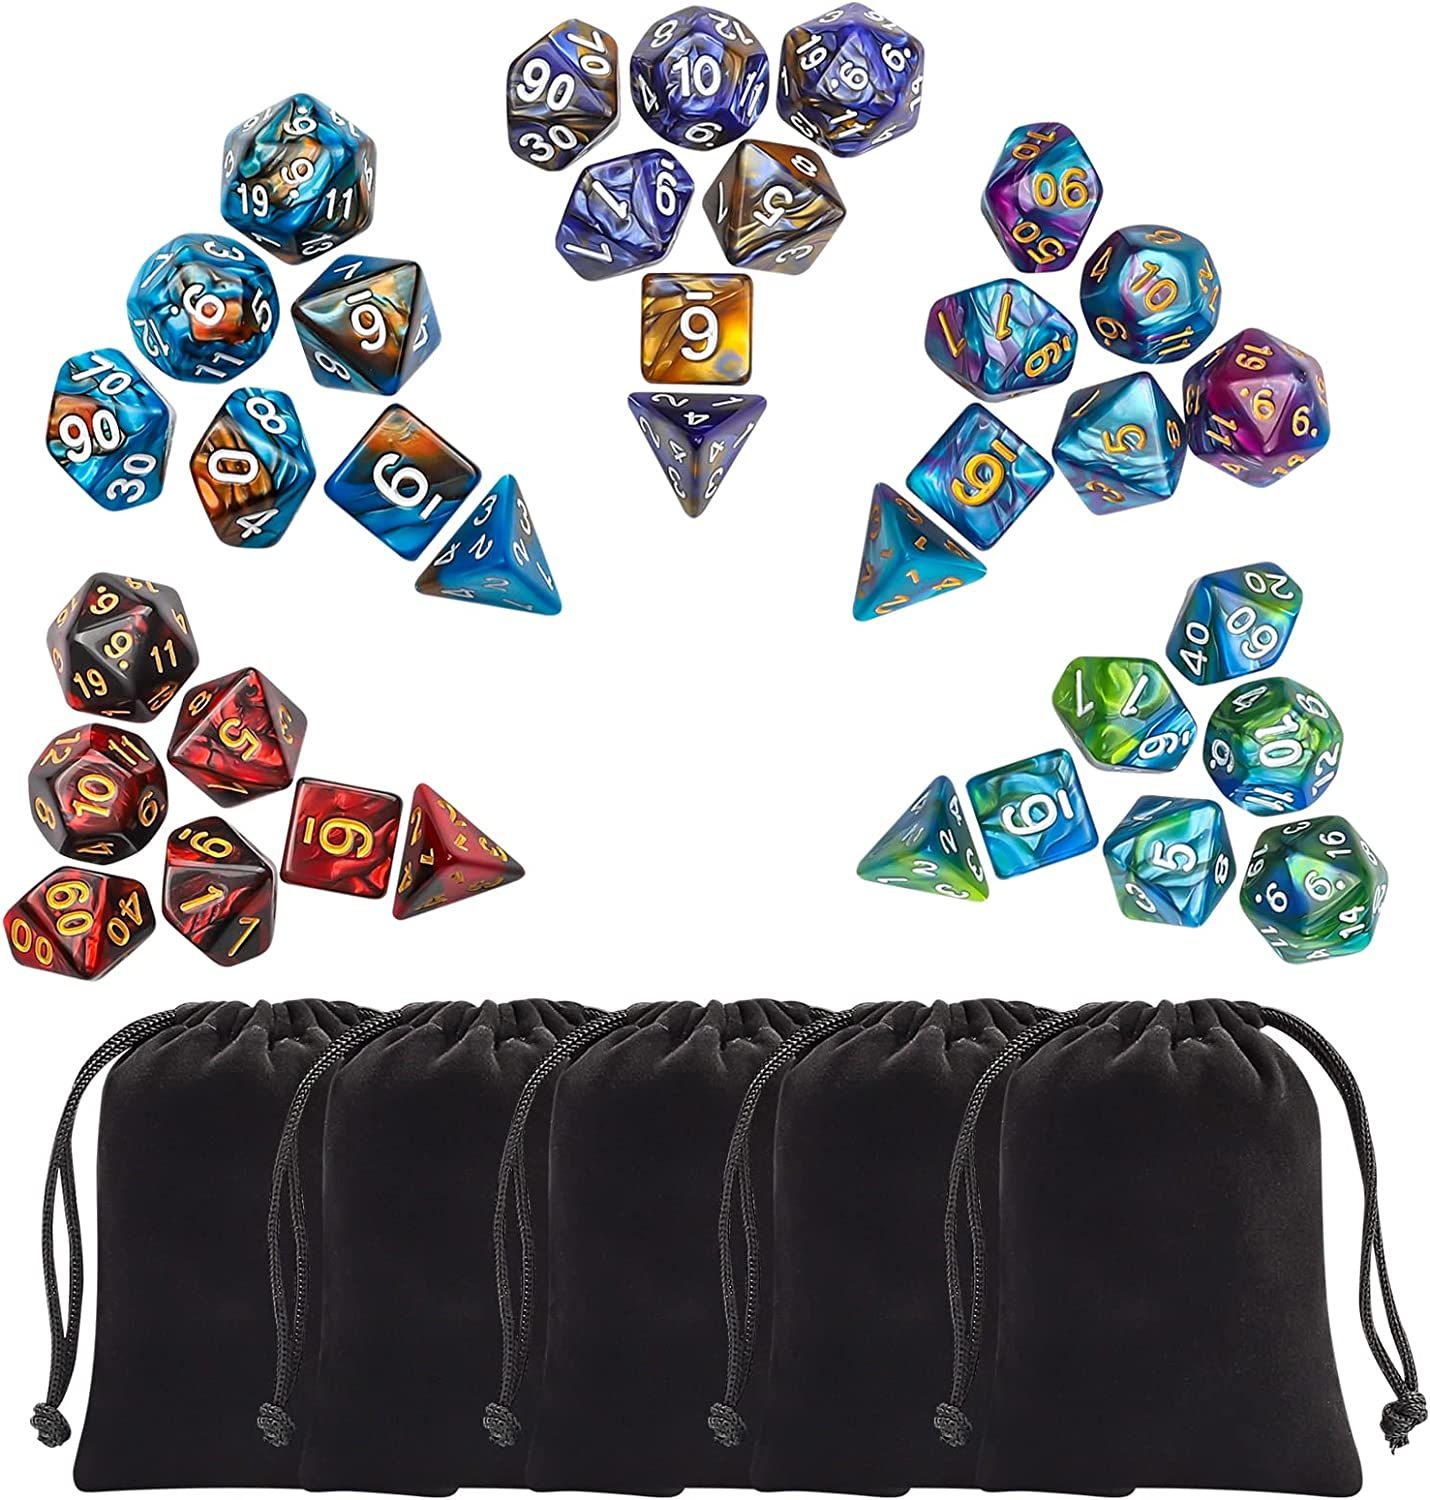 The 10 Best Dungeons & Dragons Dice Sets (Updated 2022)